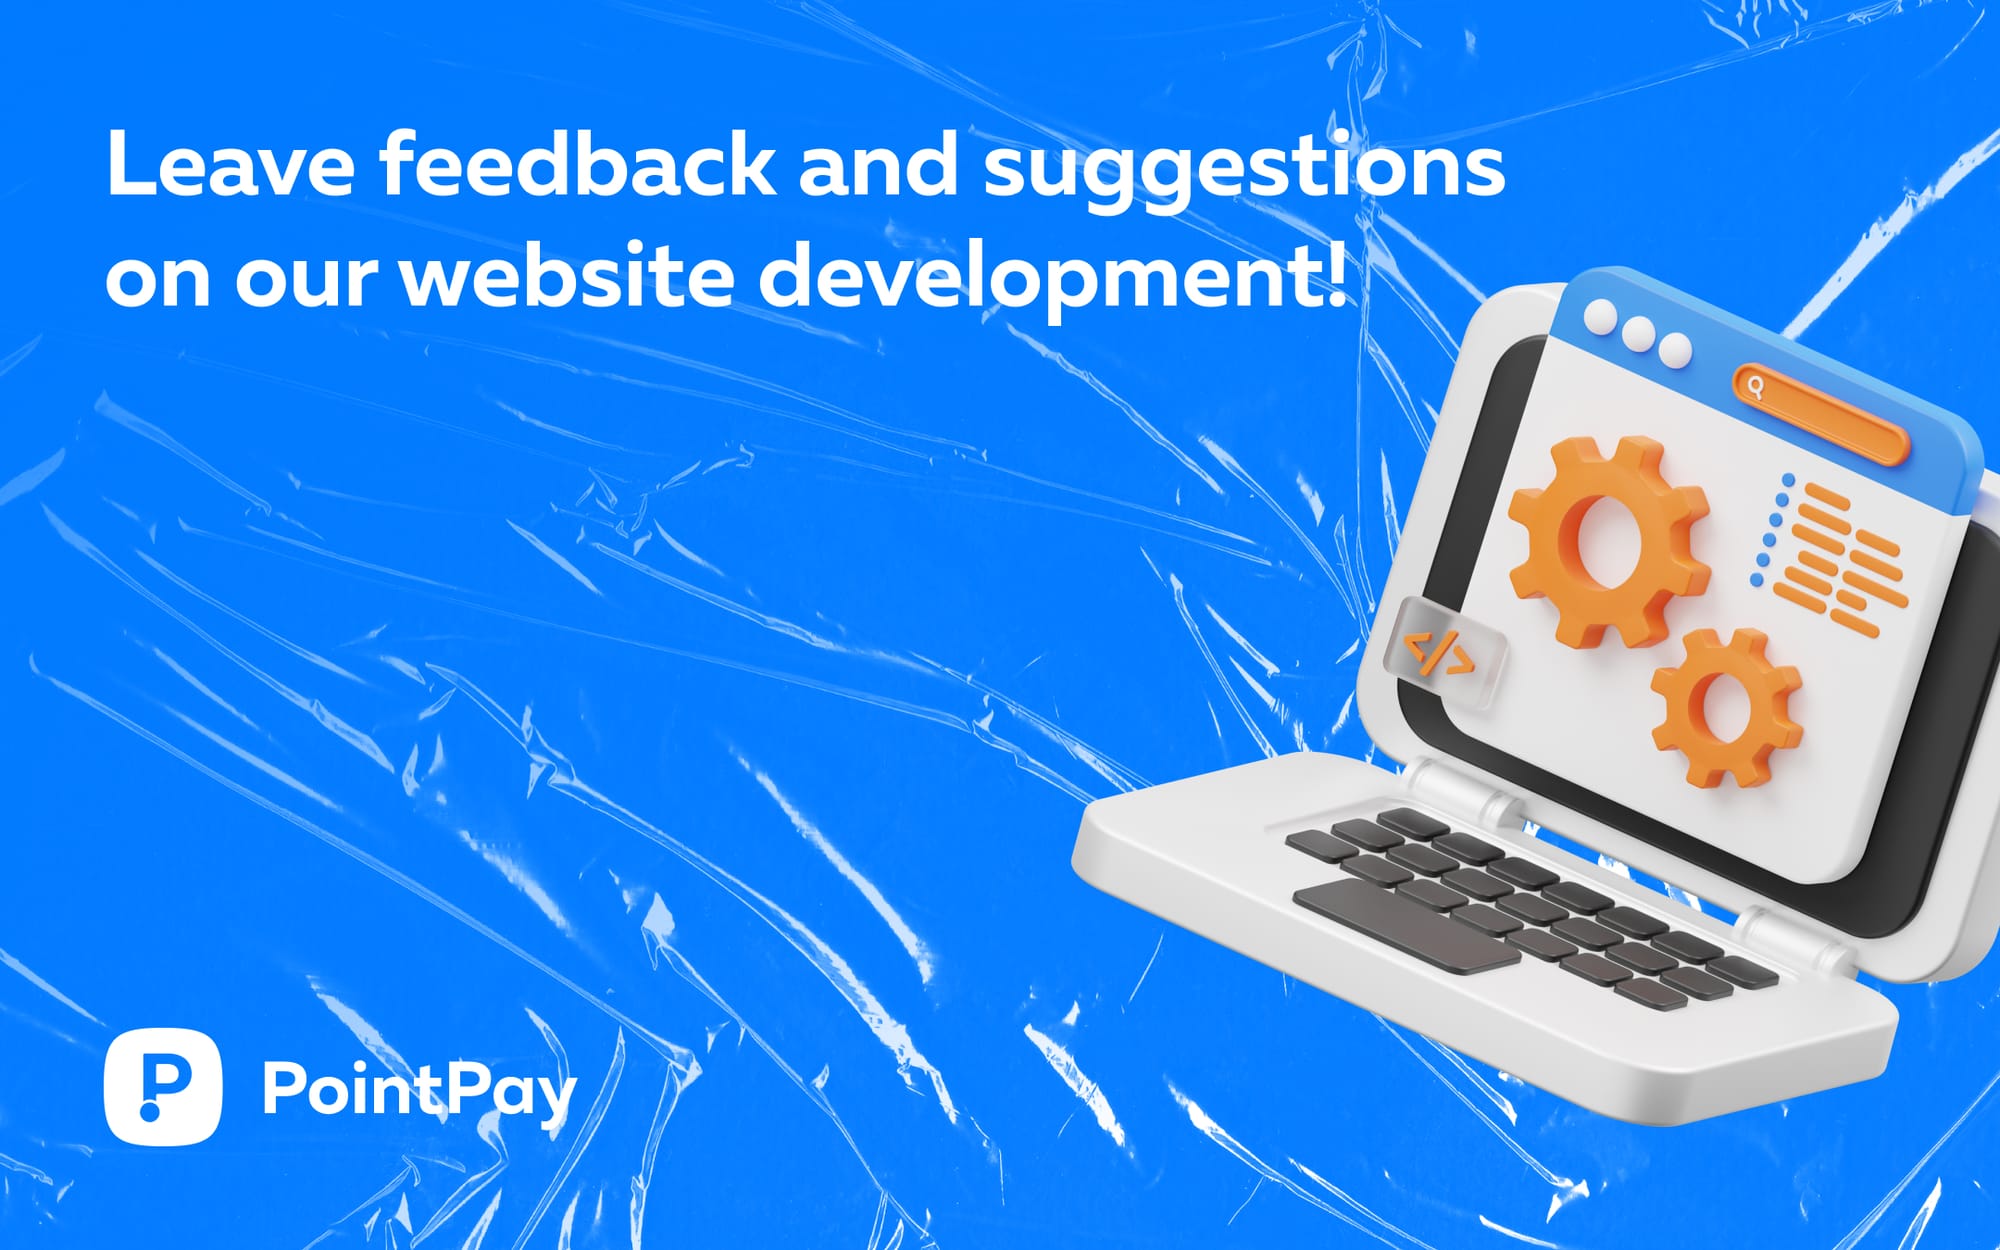 Share your opinion and ideas about the PointPay website!